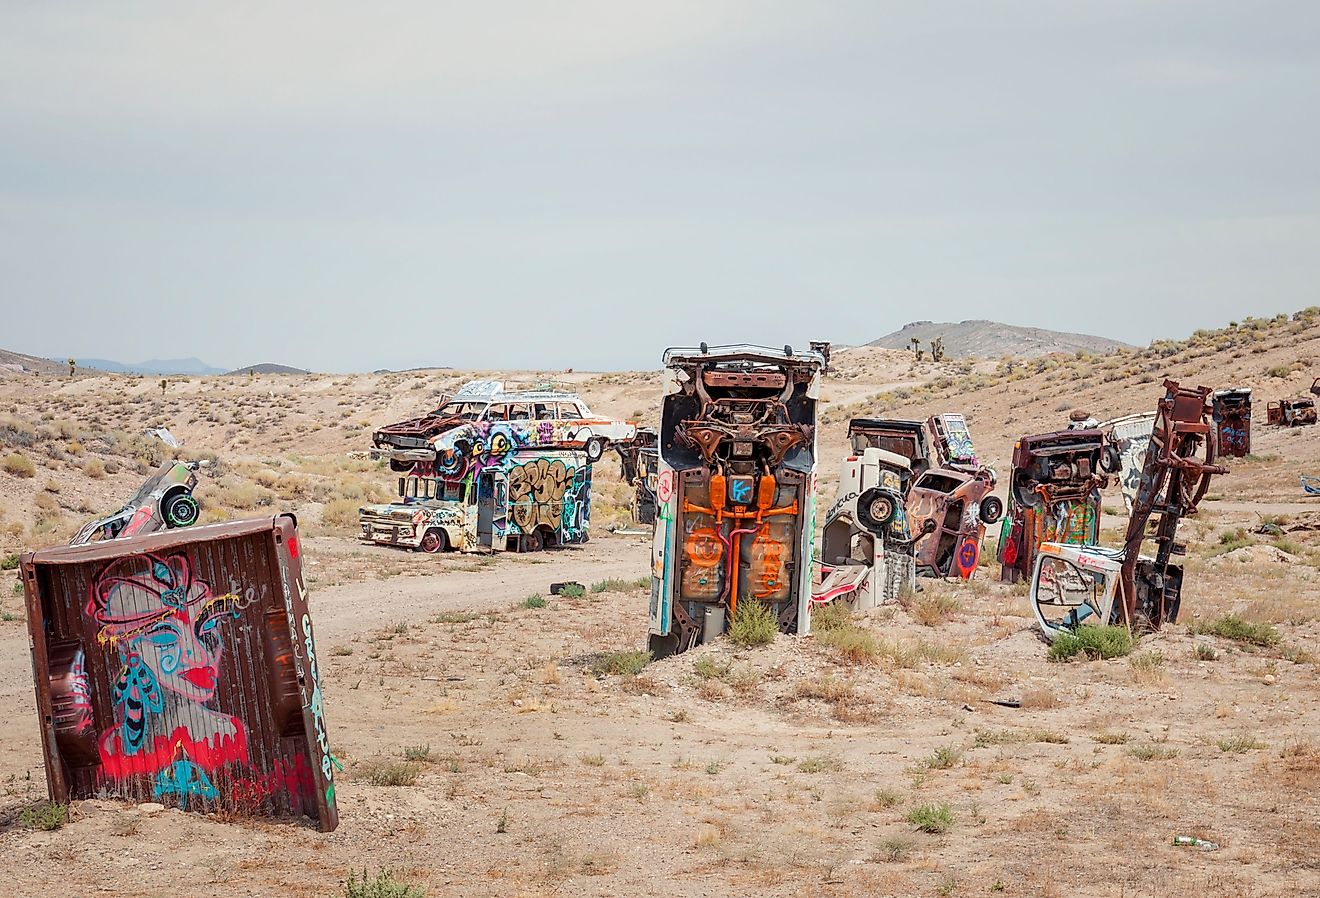 International Car Forest of the Last Church in Goldfield, Nevada. Image credit pmvfoto via Shutterstock.